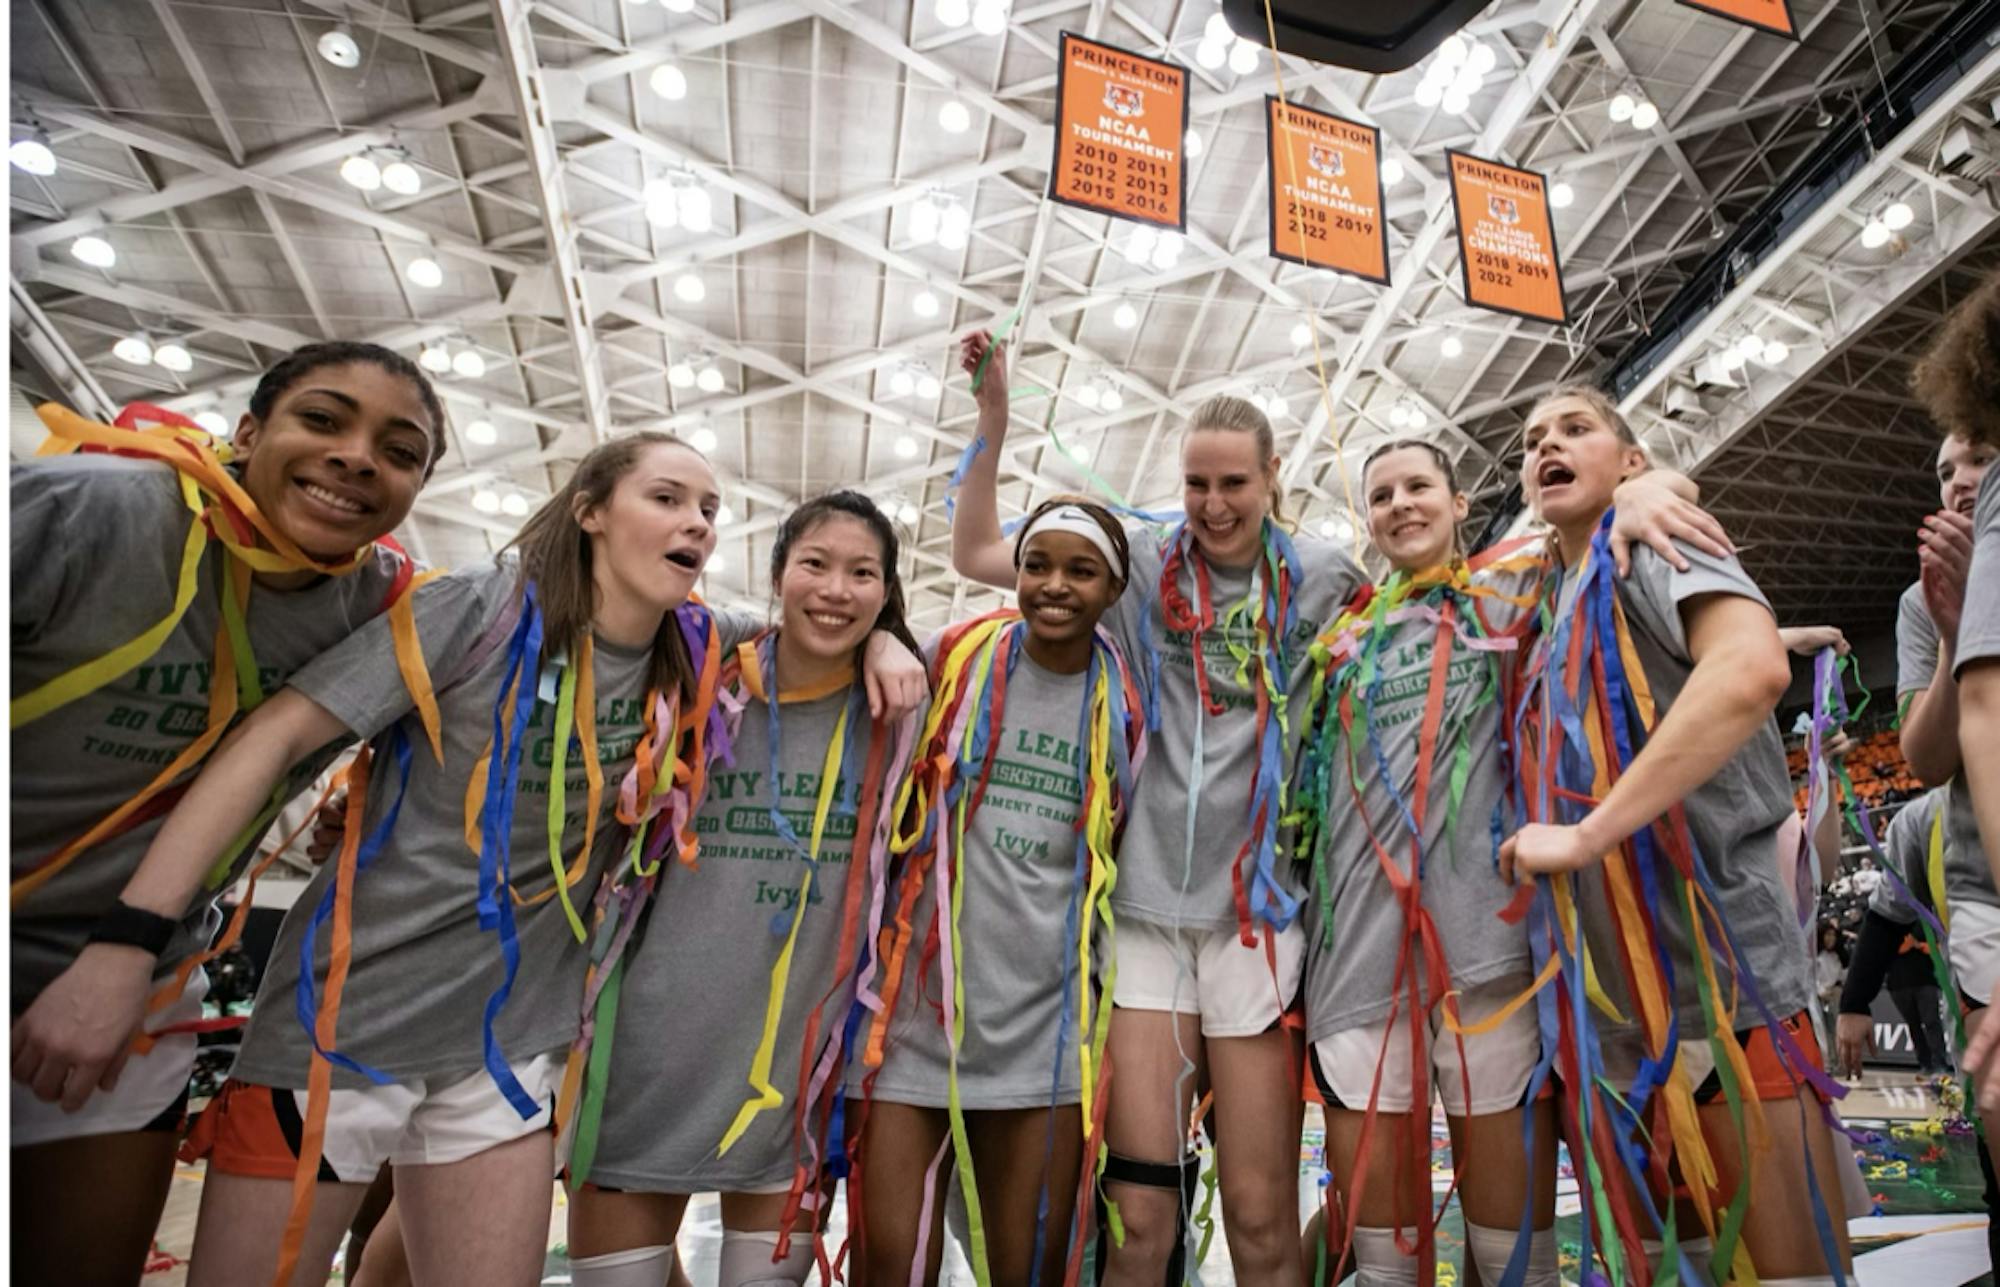 Women's basketball team huddled together celebrating win covered in streamers. 